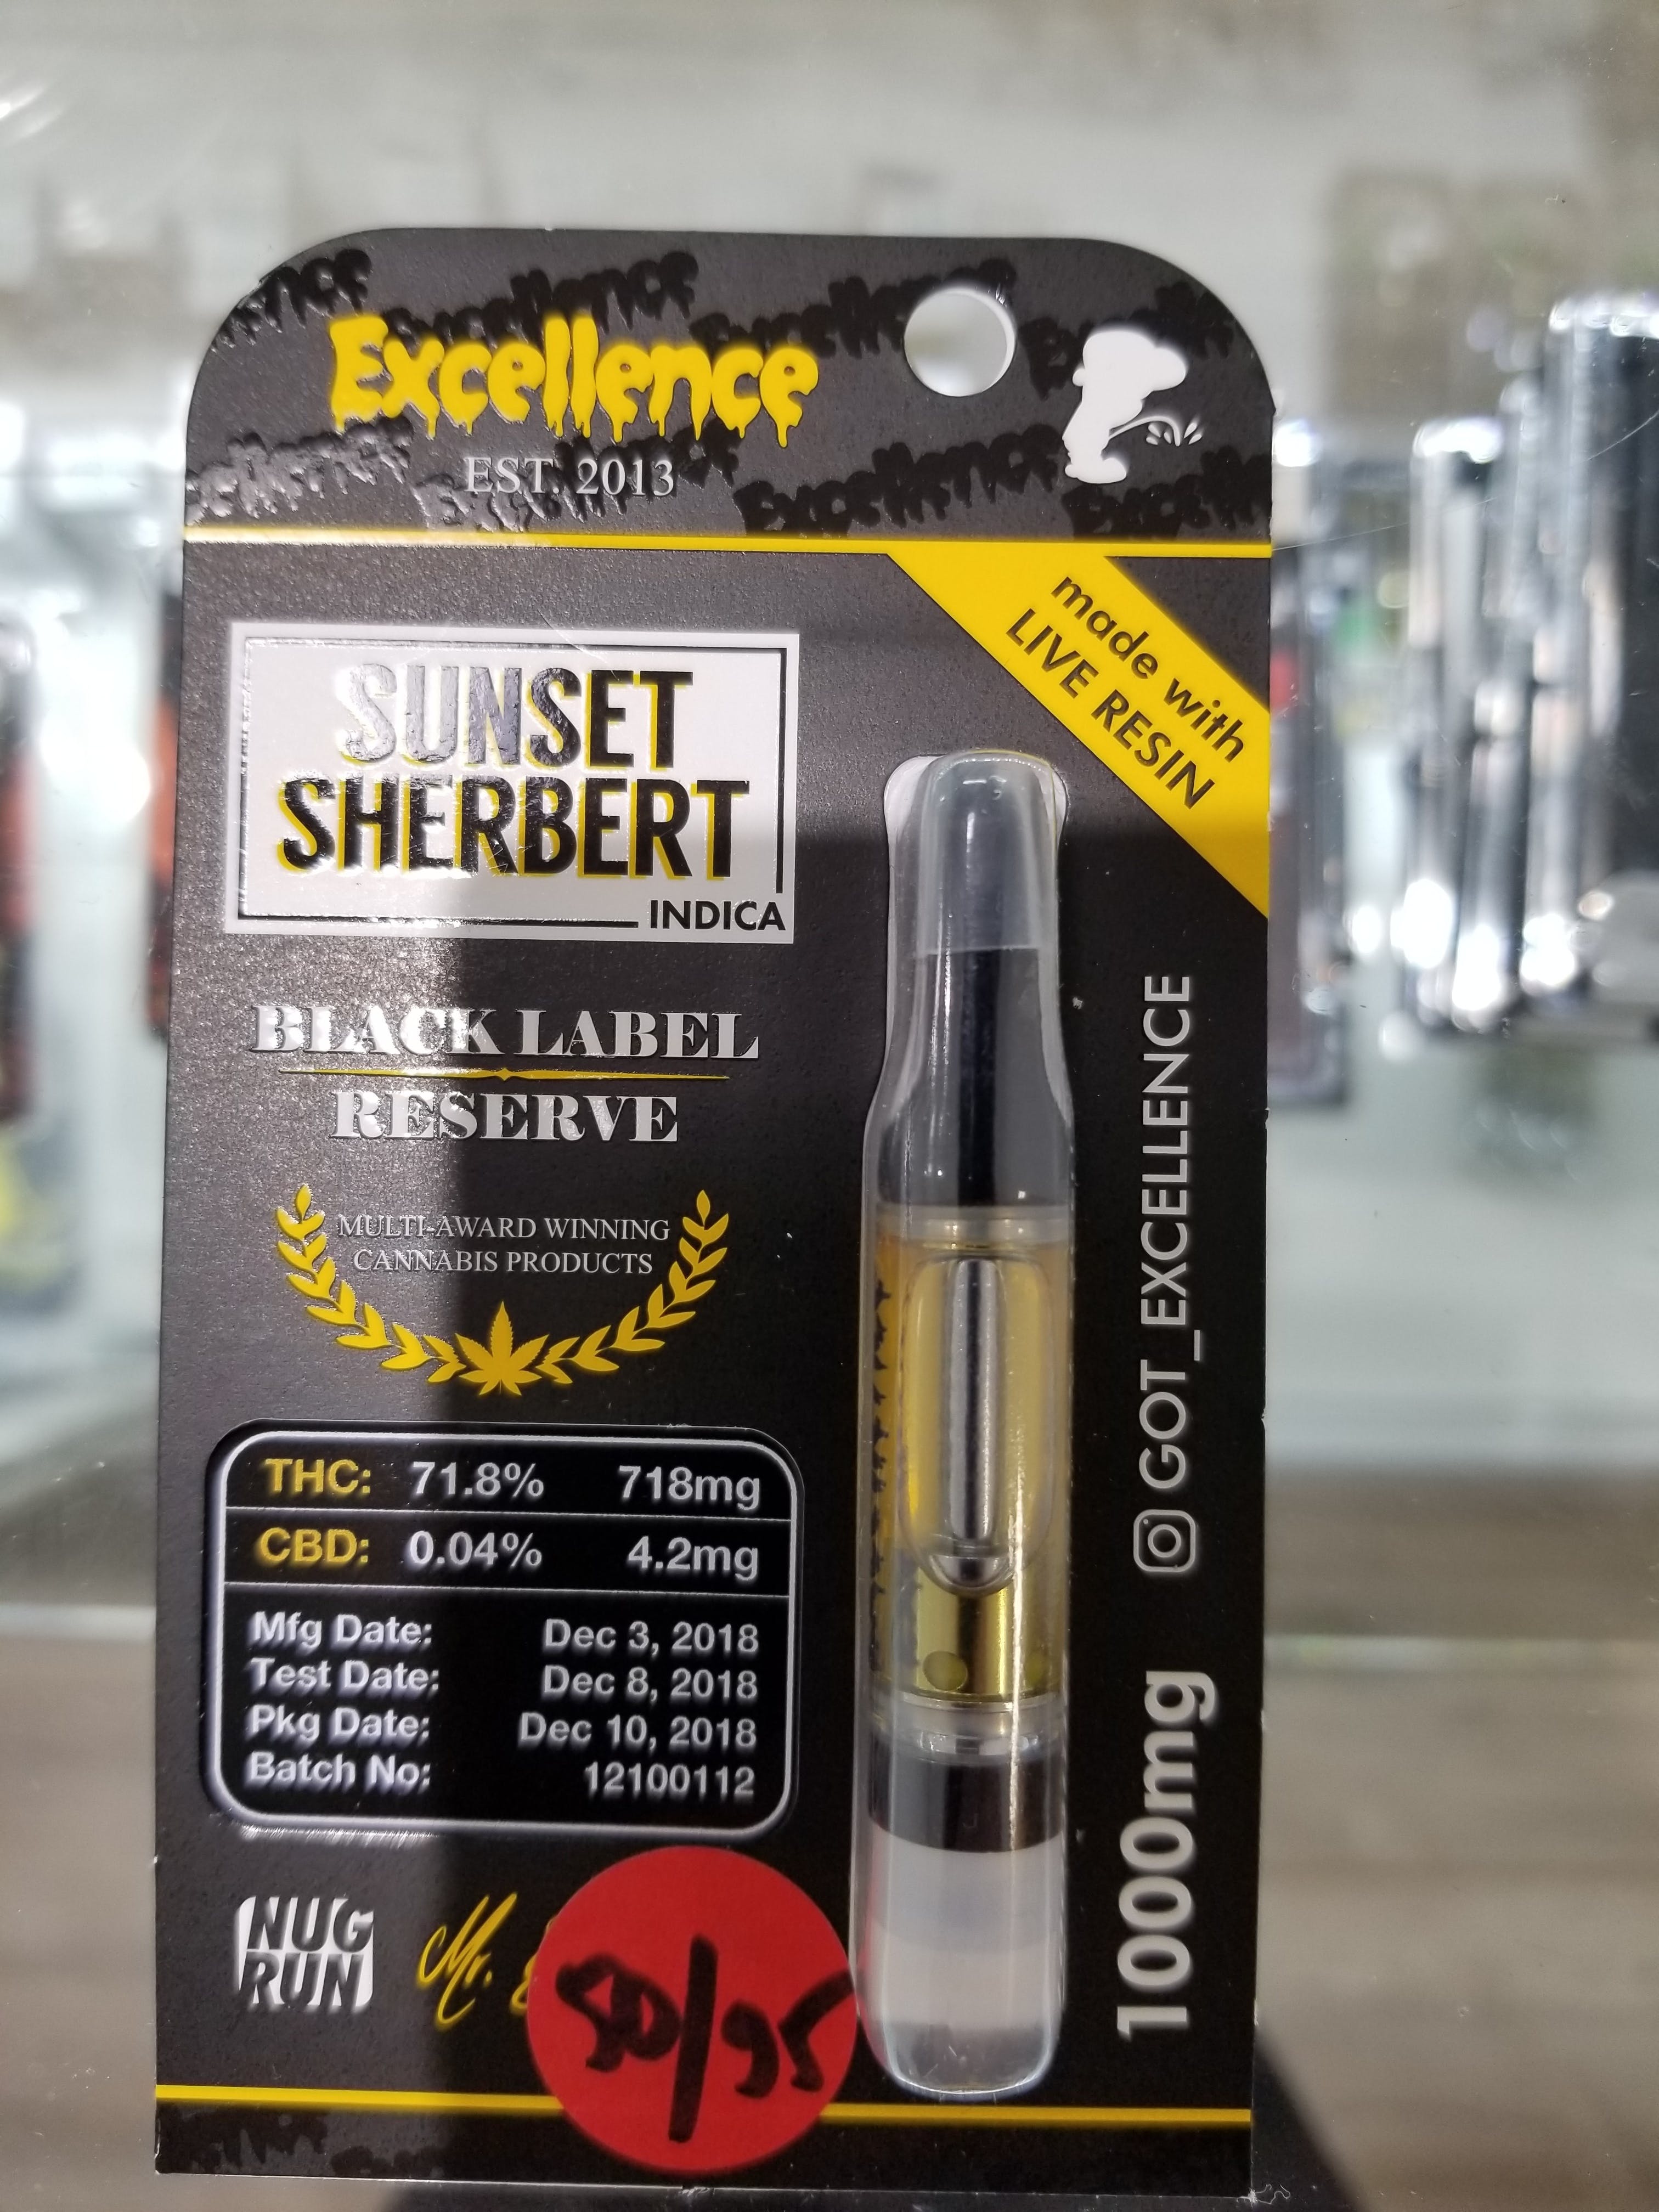 concentrate-excellence-sunset-sherbert-indica-1000-mg